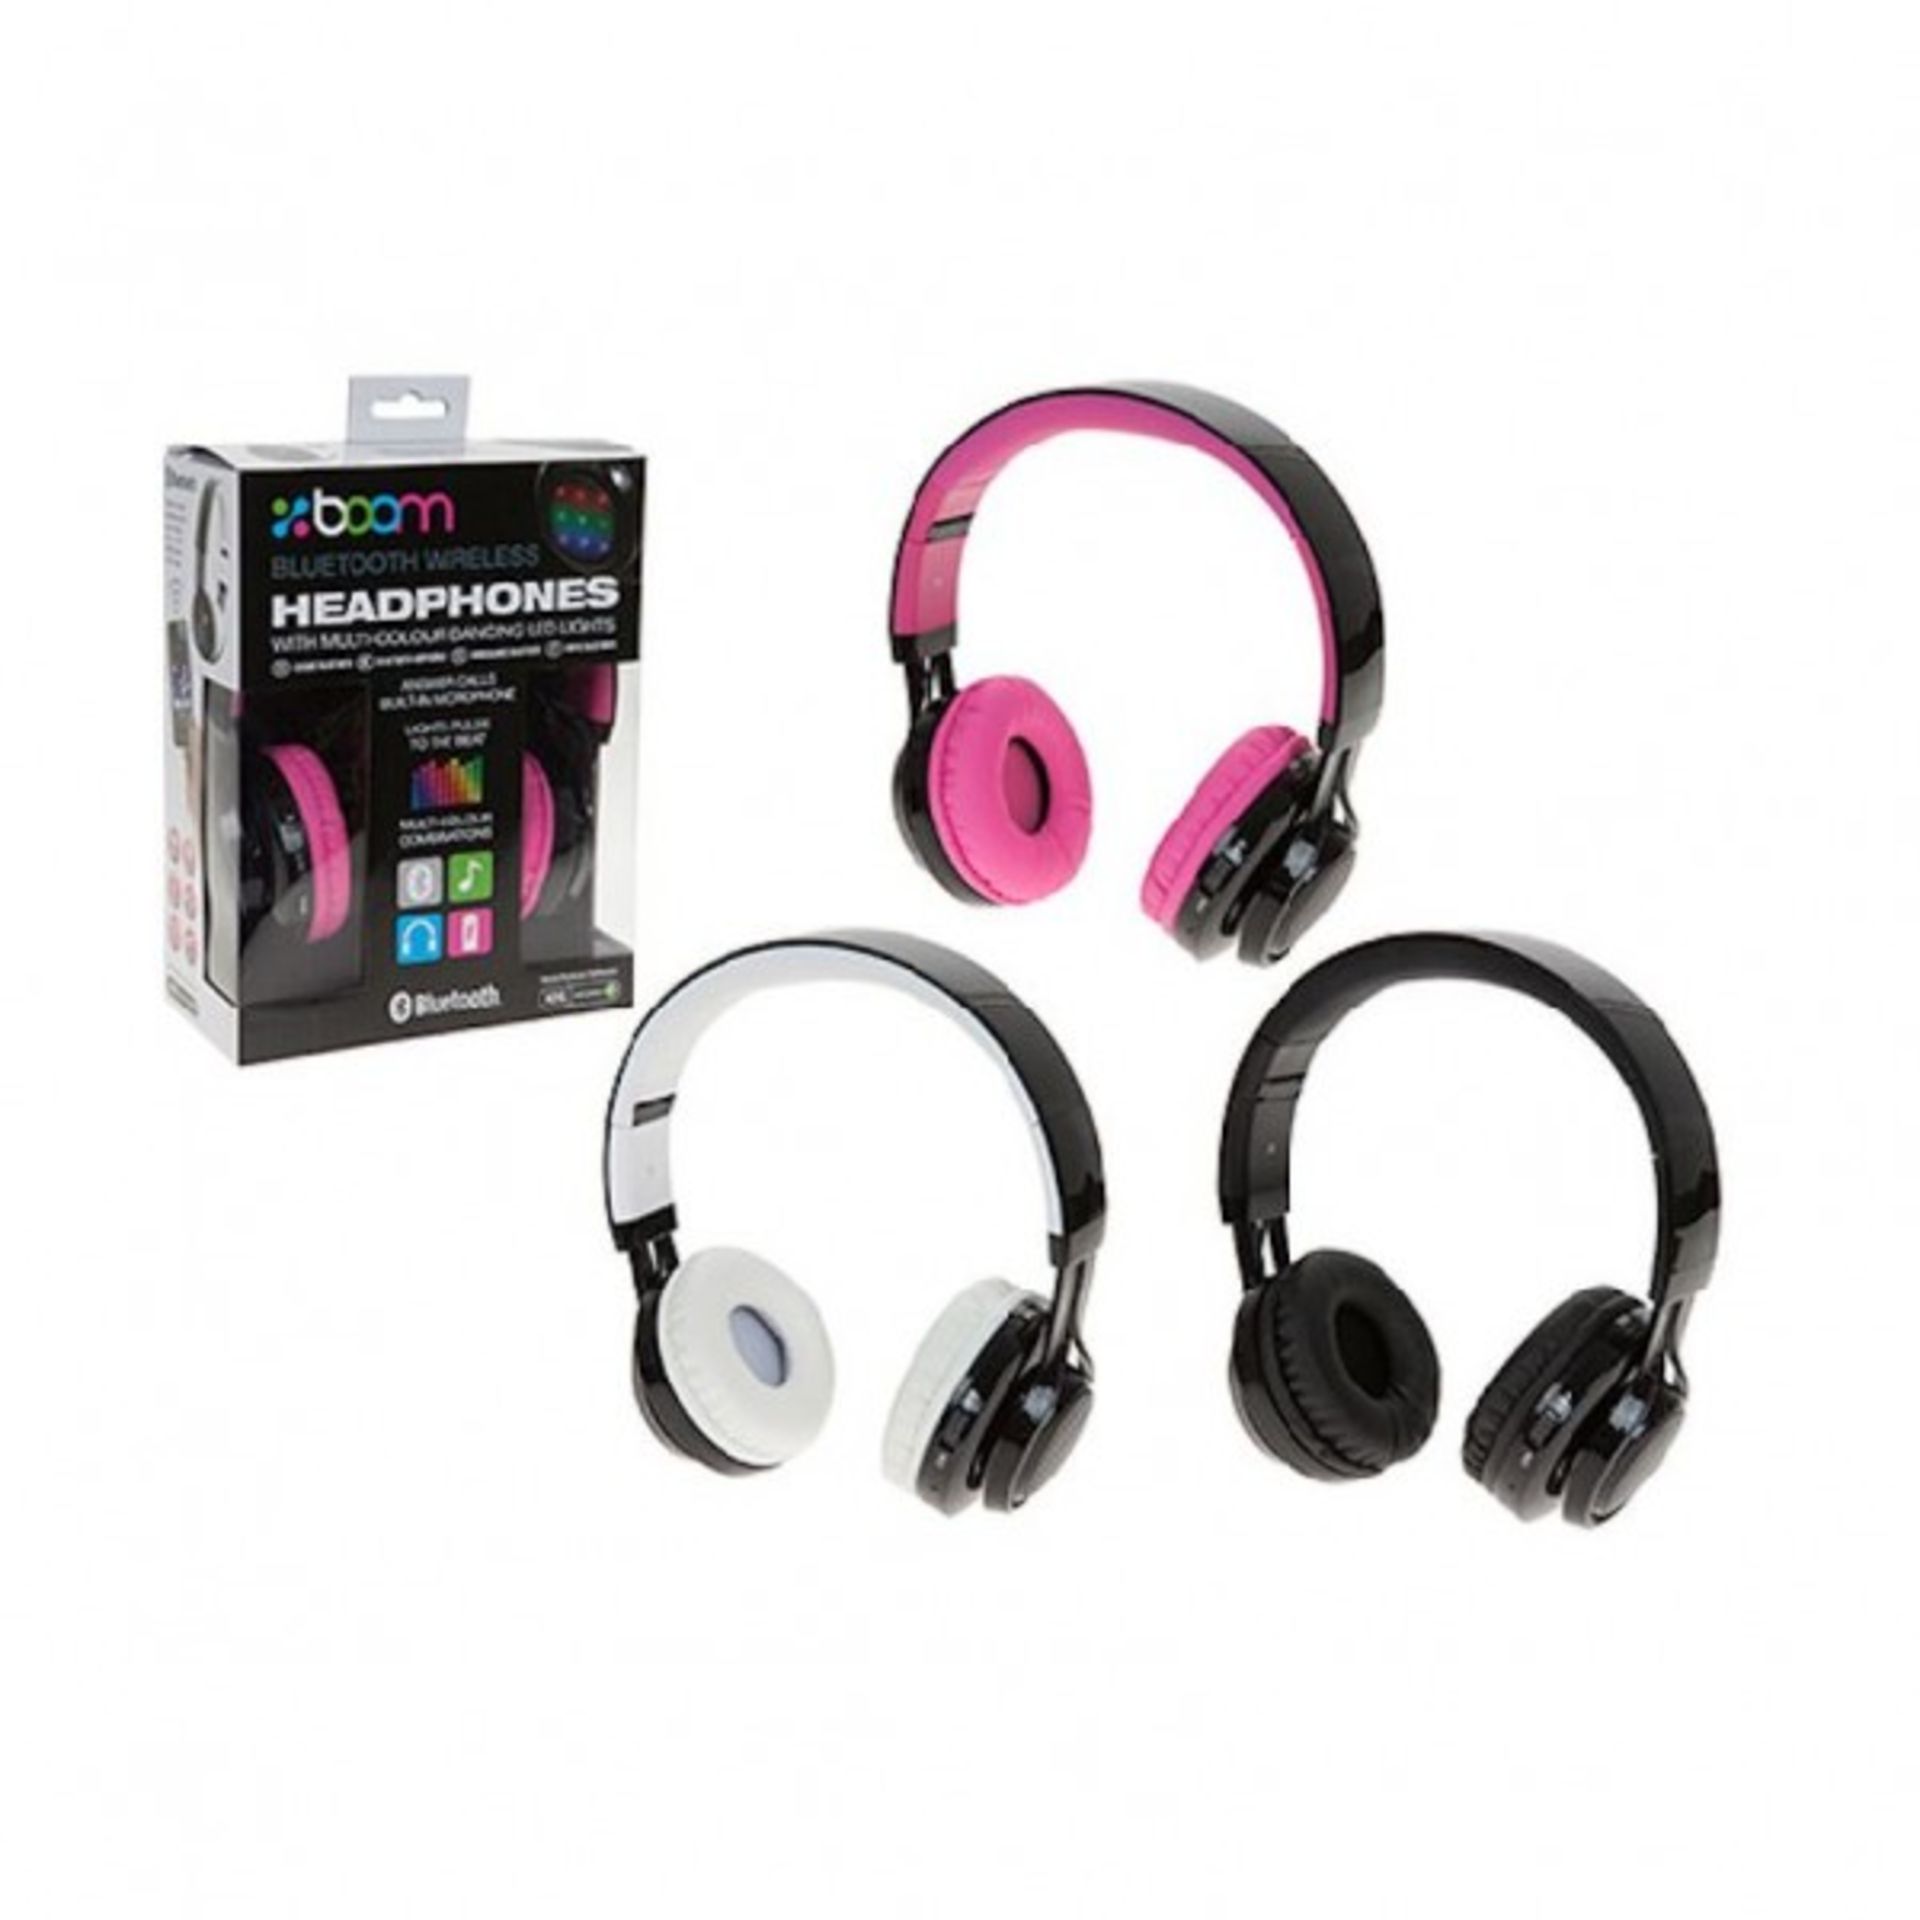 V *TRADE QTY* Brand New Boom Bluetooth Wireless Headphones With Multi Colour Dancing LED Lights